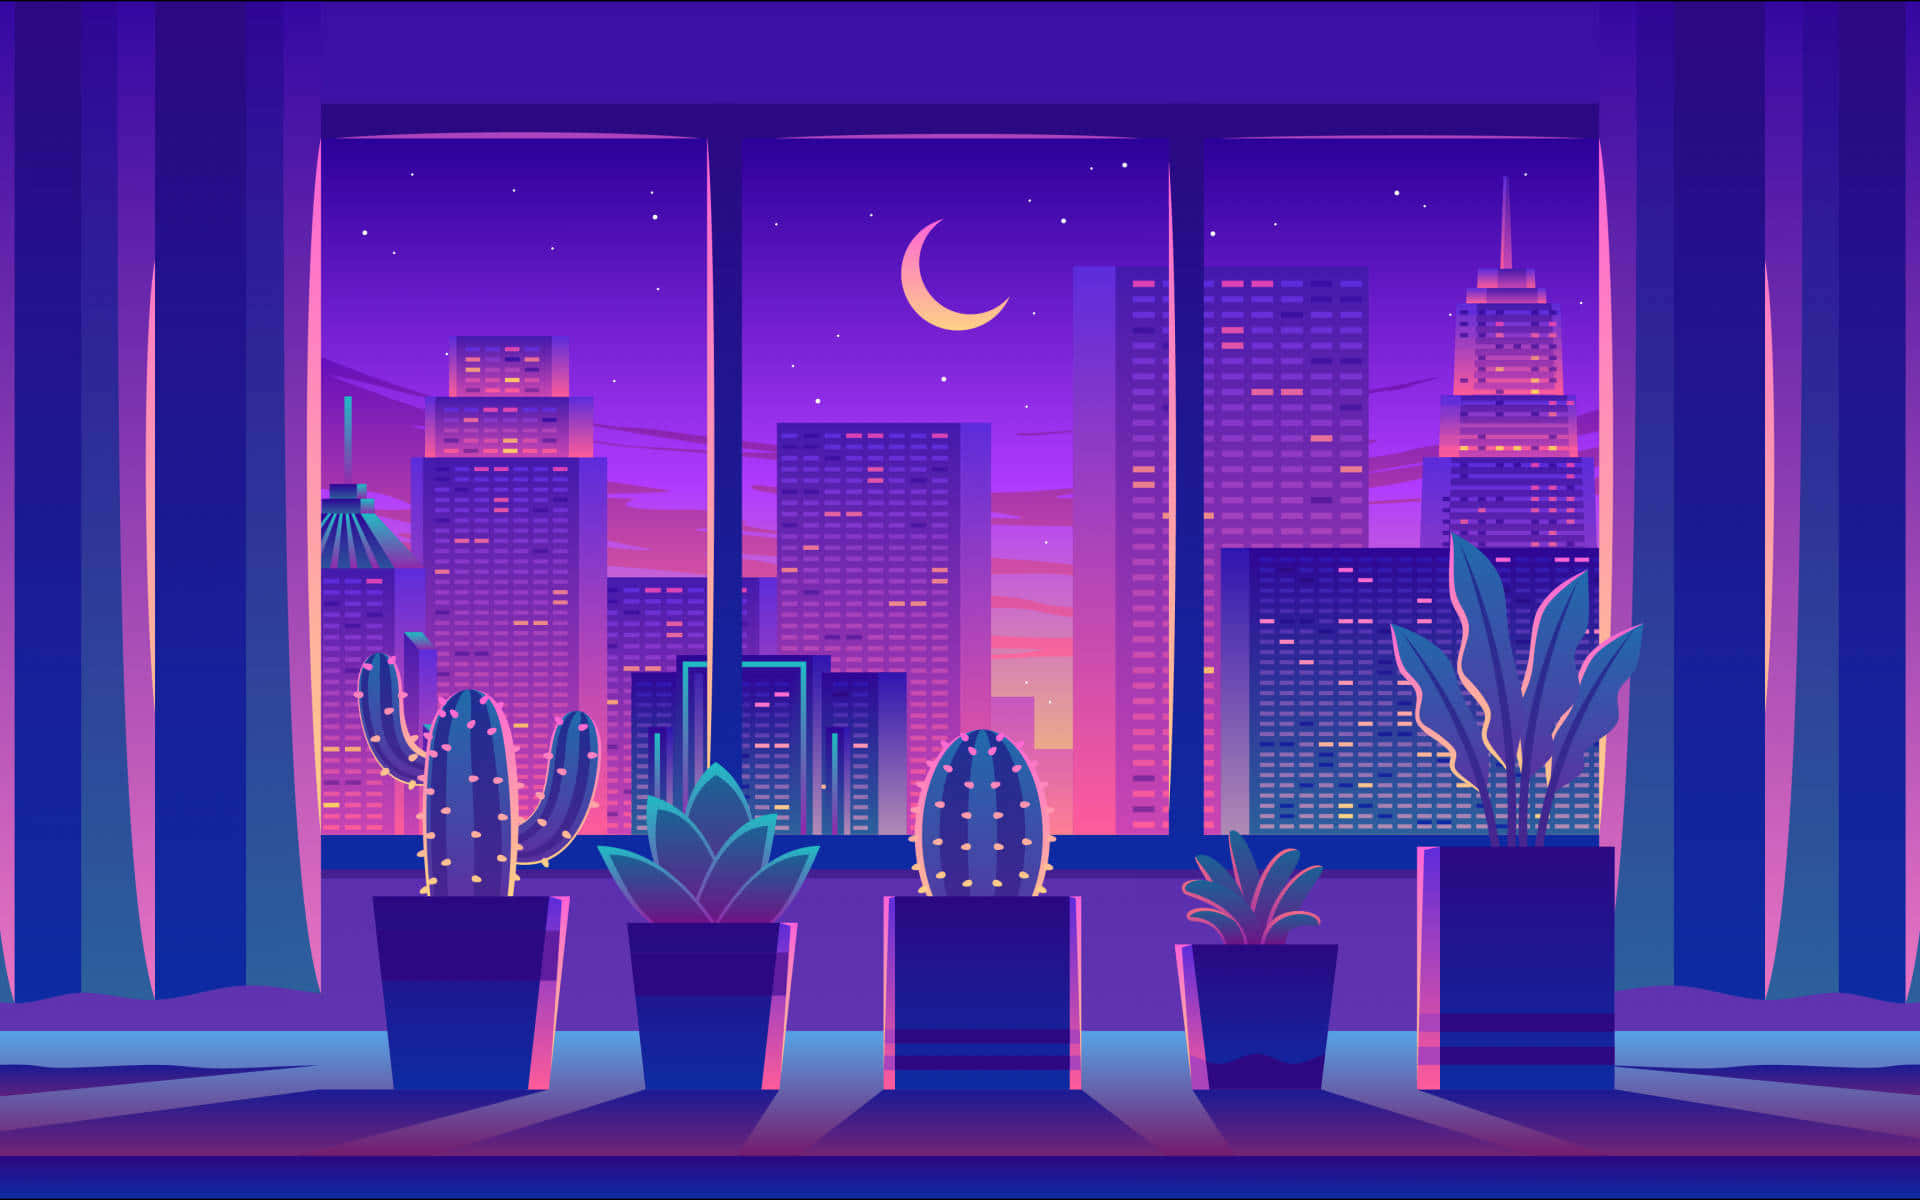 A Night Scene With Cactus And Cityscape Wallpaper